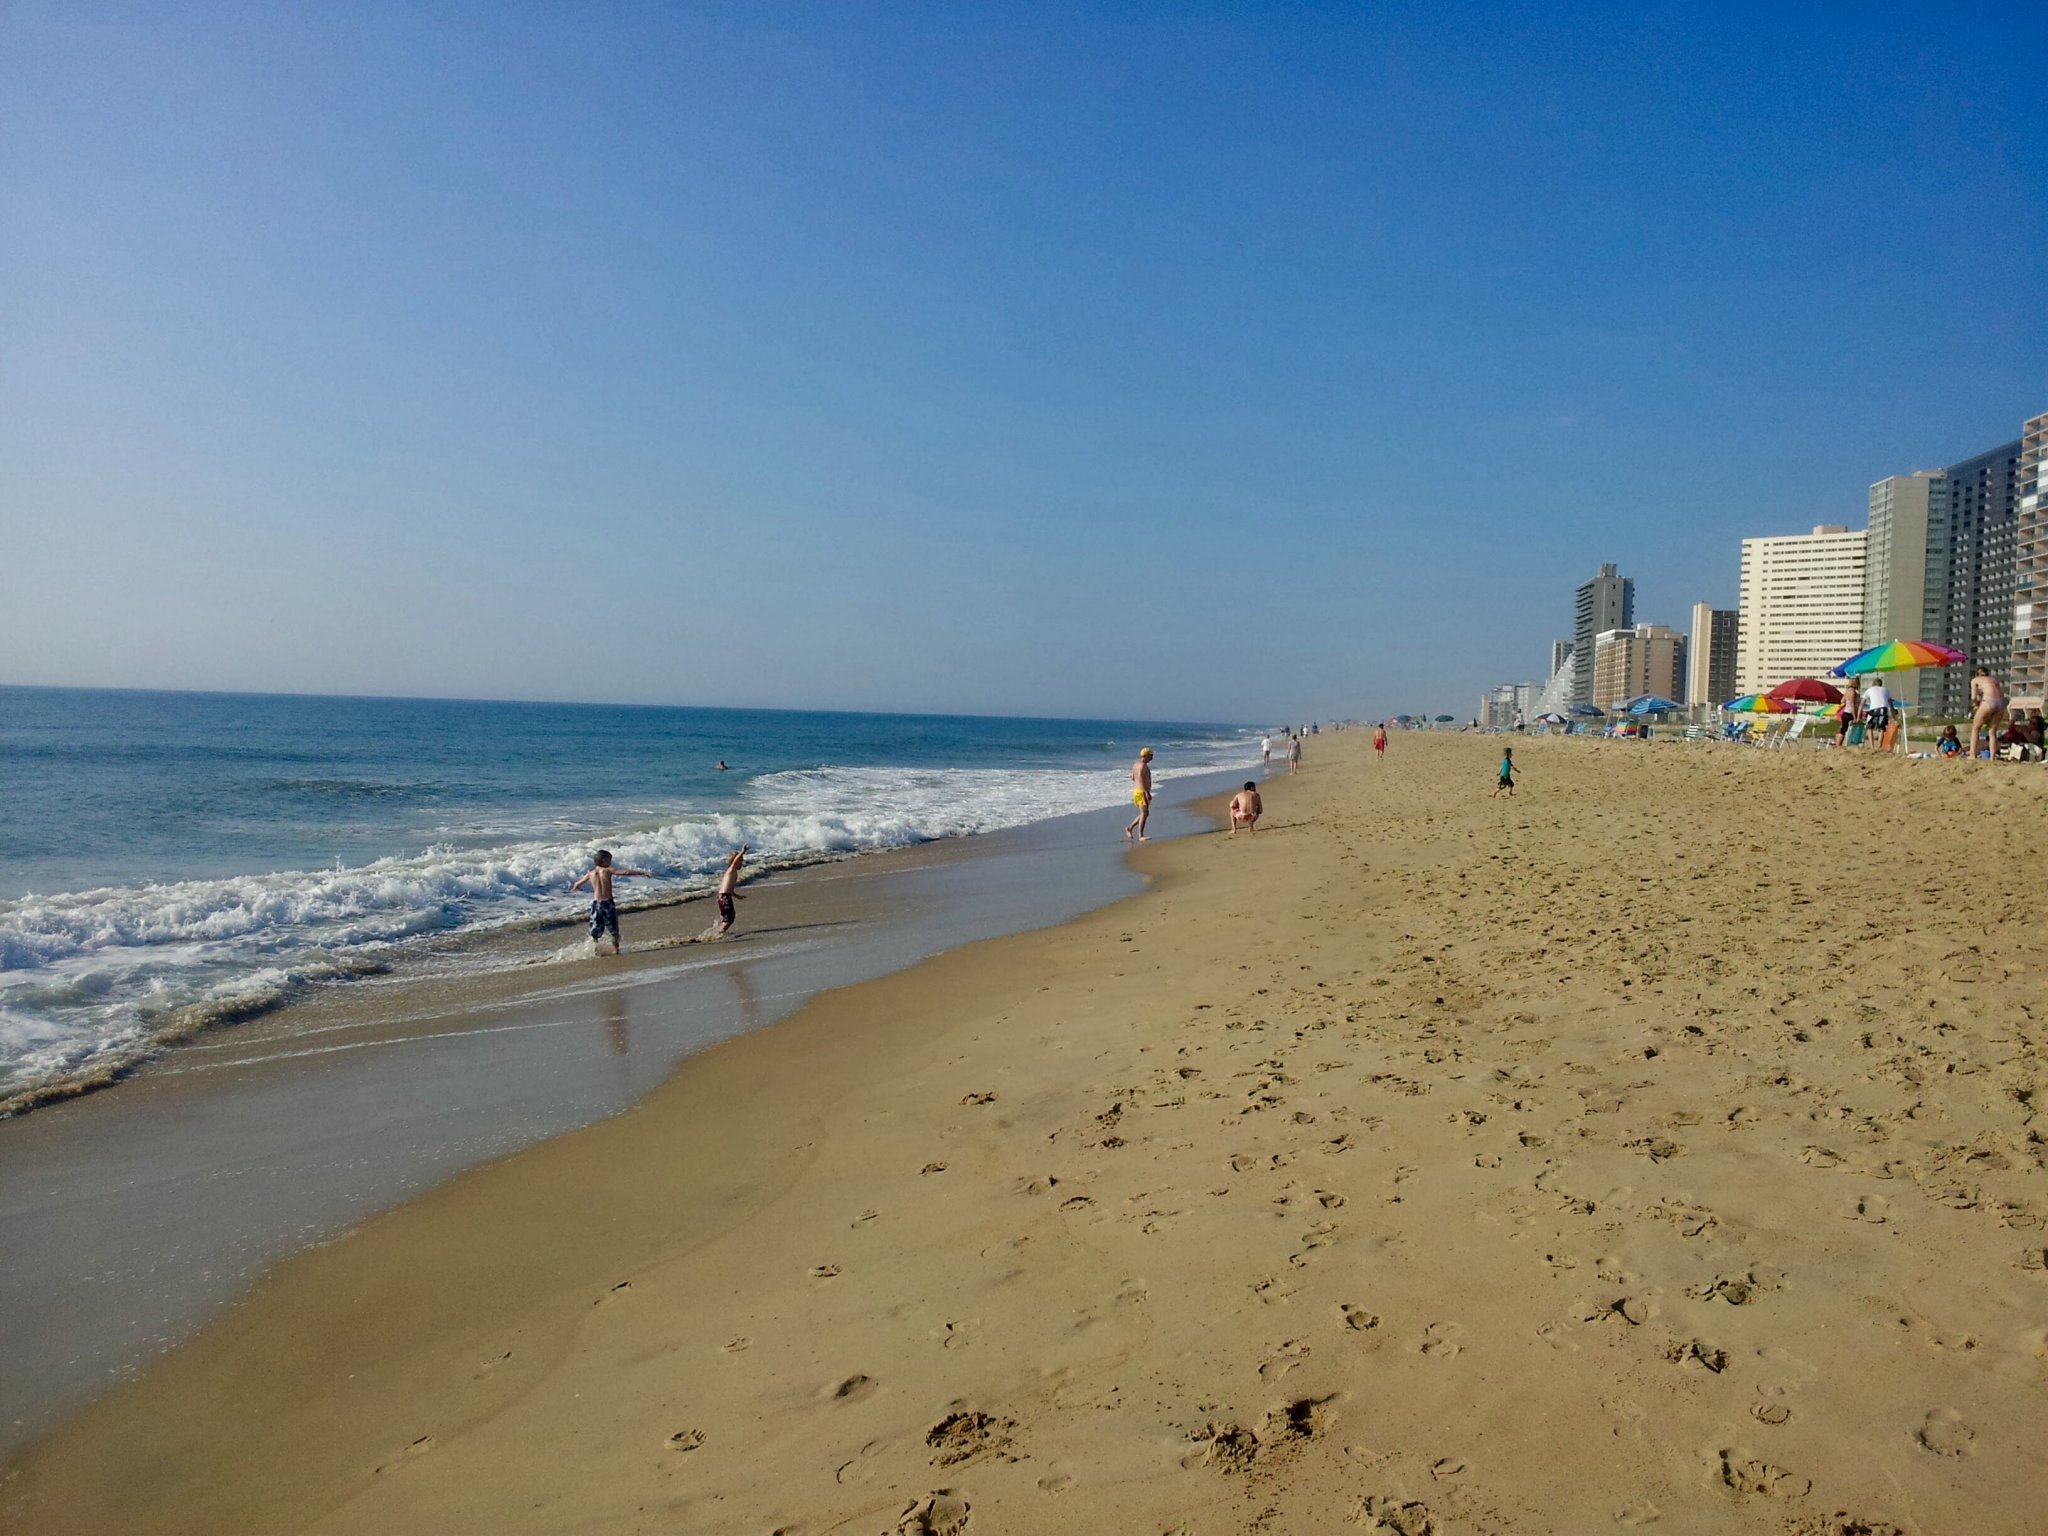 Quick Guide to Ocean City: the South End of the Beach is generally less crowded